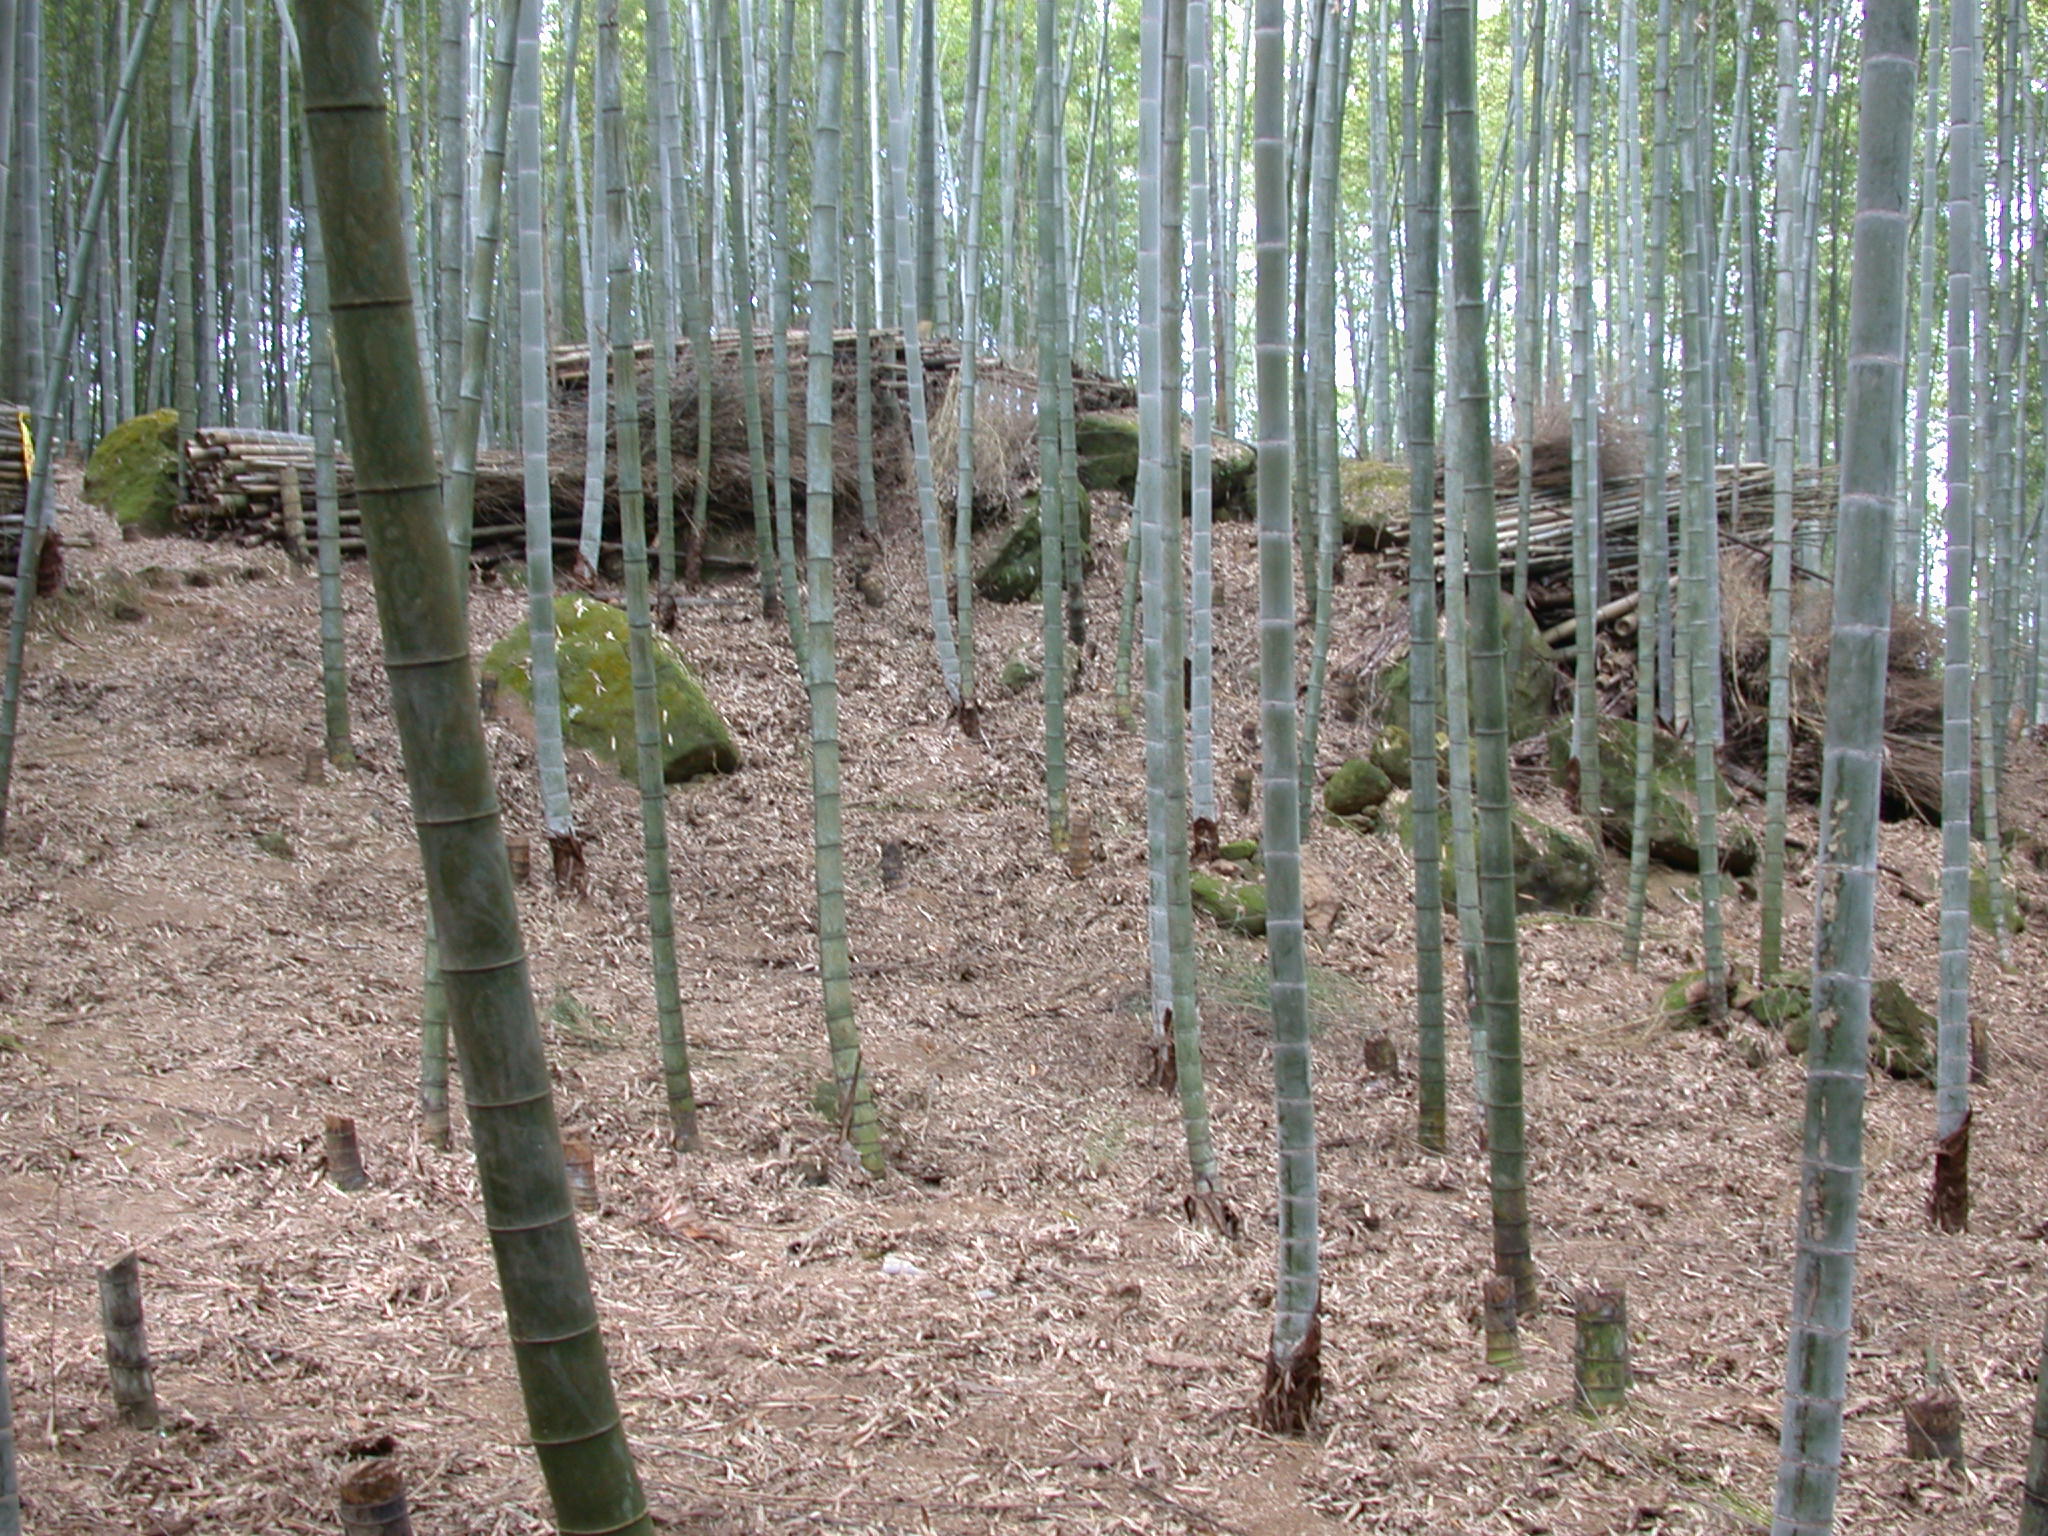 The operation of the Conserved Bamboo Forest in 5th forest compartment, Xitou tract.